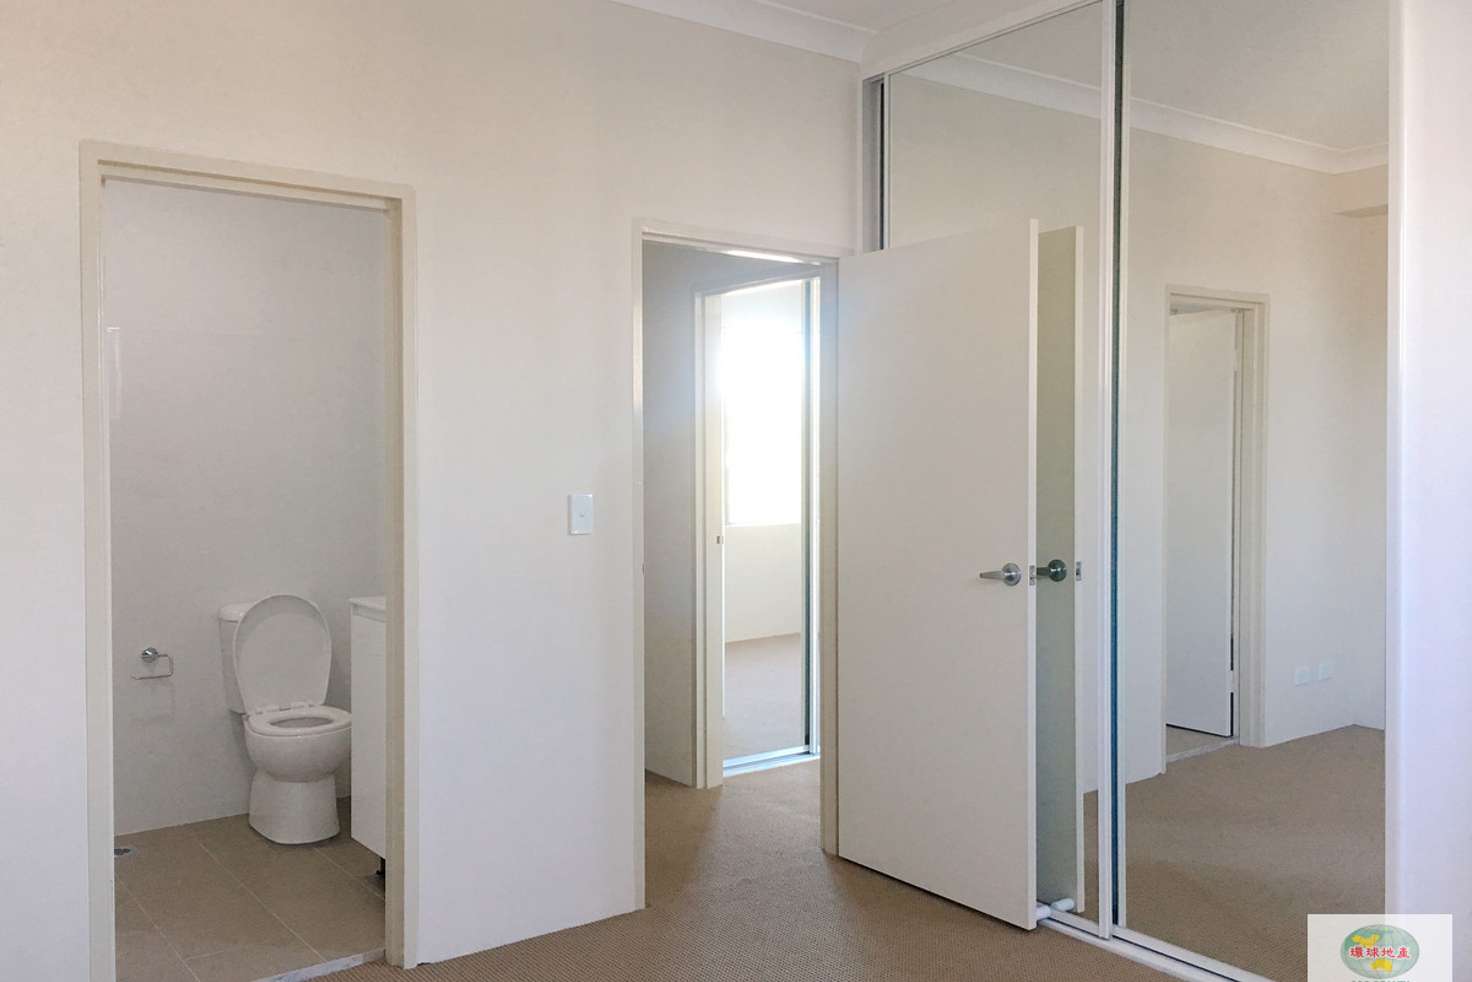 Main view of Homely apartment listing, 9/135-137 Pitt Street, Merrylands NSW 2160